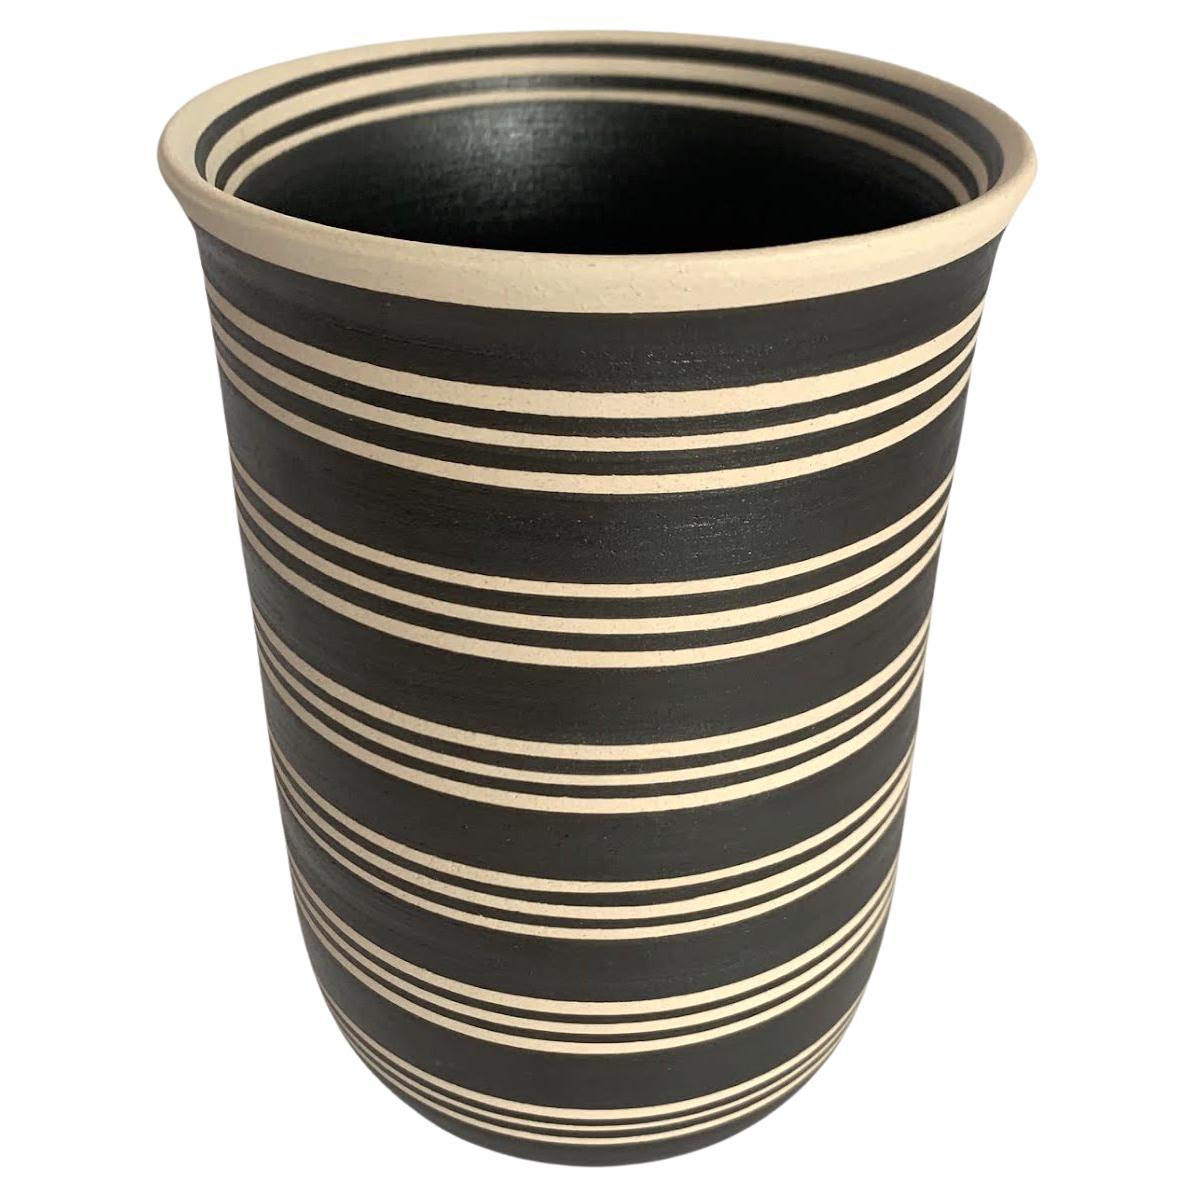 Black And Cream Triple Band Stripe Wide Opening Vase, Turkey, Contemporary